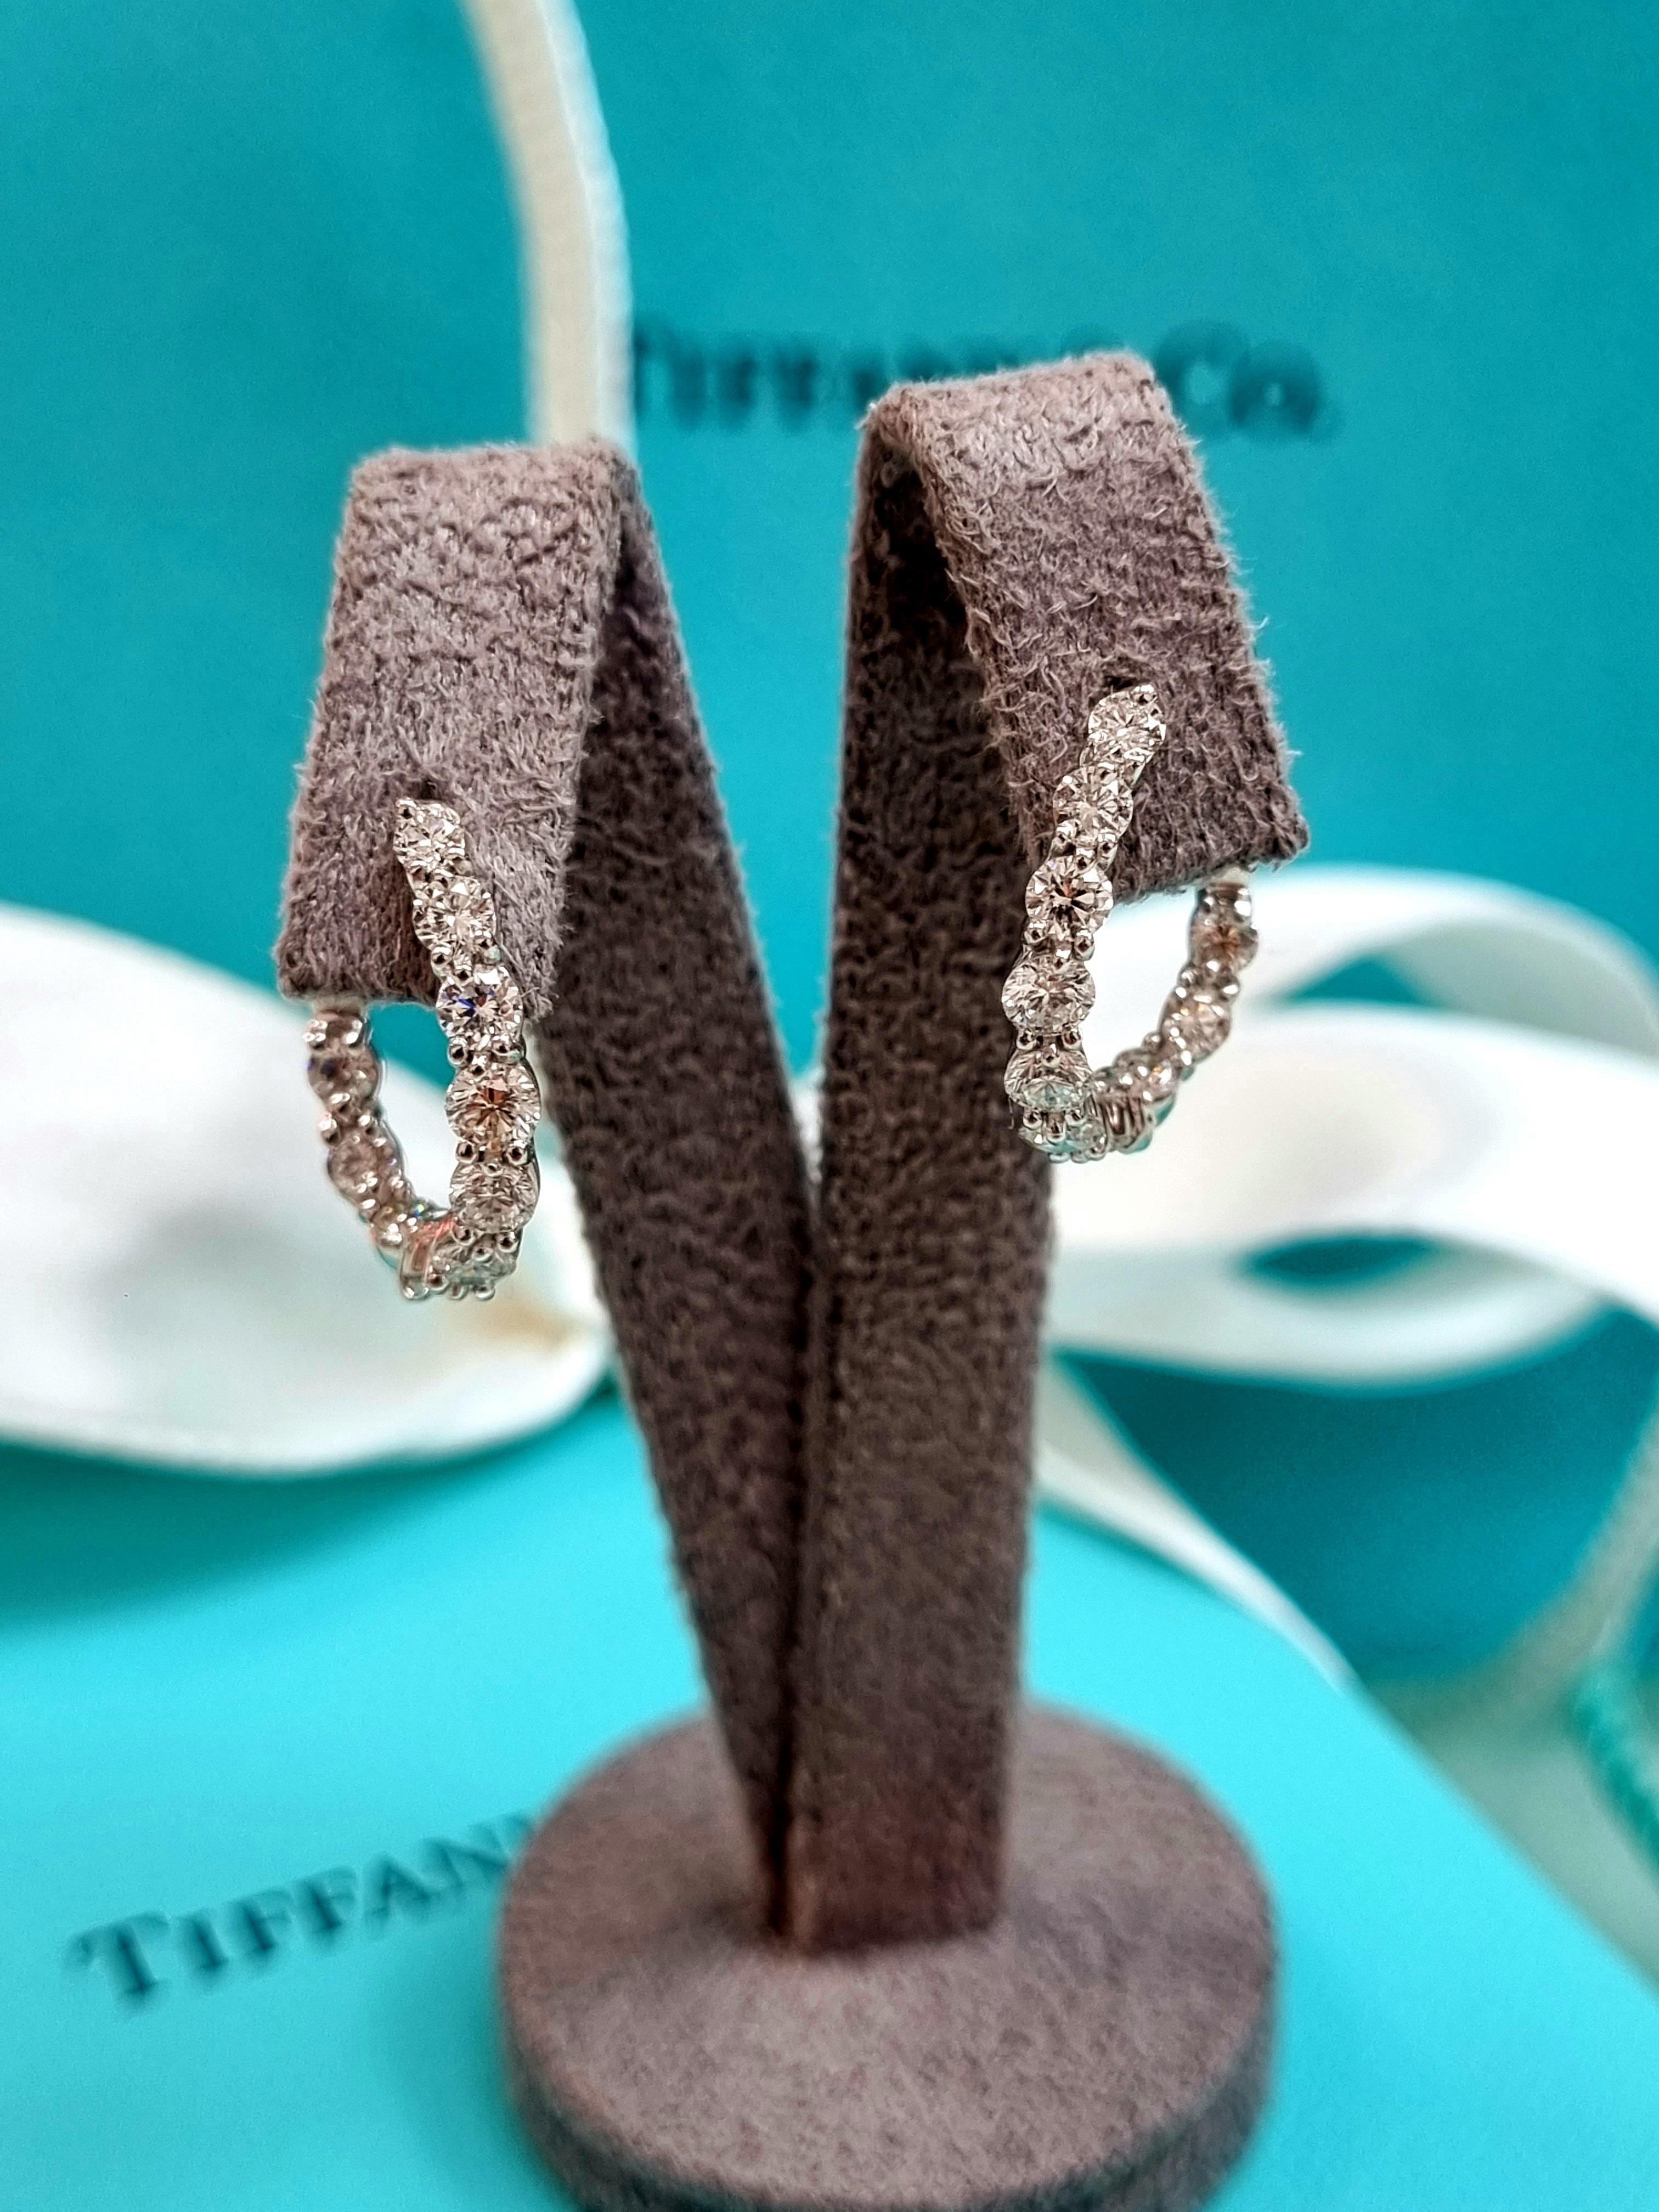 Introducing a luxurious pair of Tiffany & Co. Inside-Out Hoop Earrings, meticulously crafted in exquisite platinum, the epitome of timeless elegance and sophistication. These hoops redefine grace with a seamless blend of classic design and